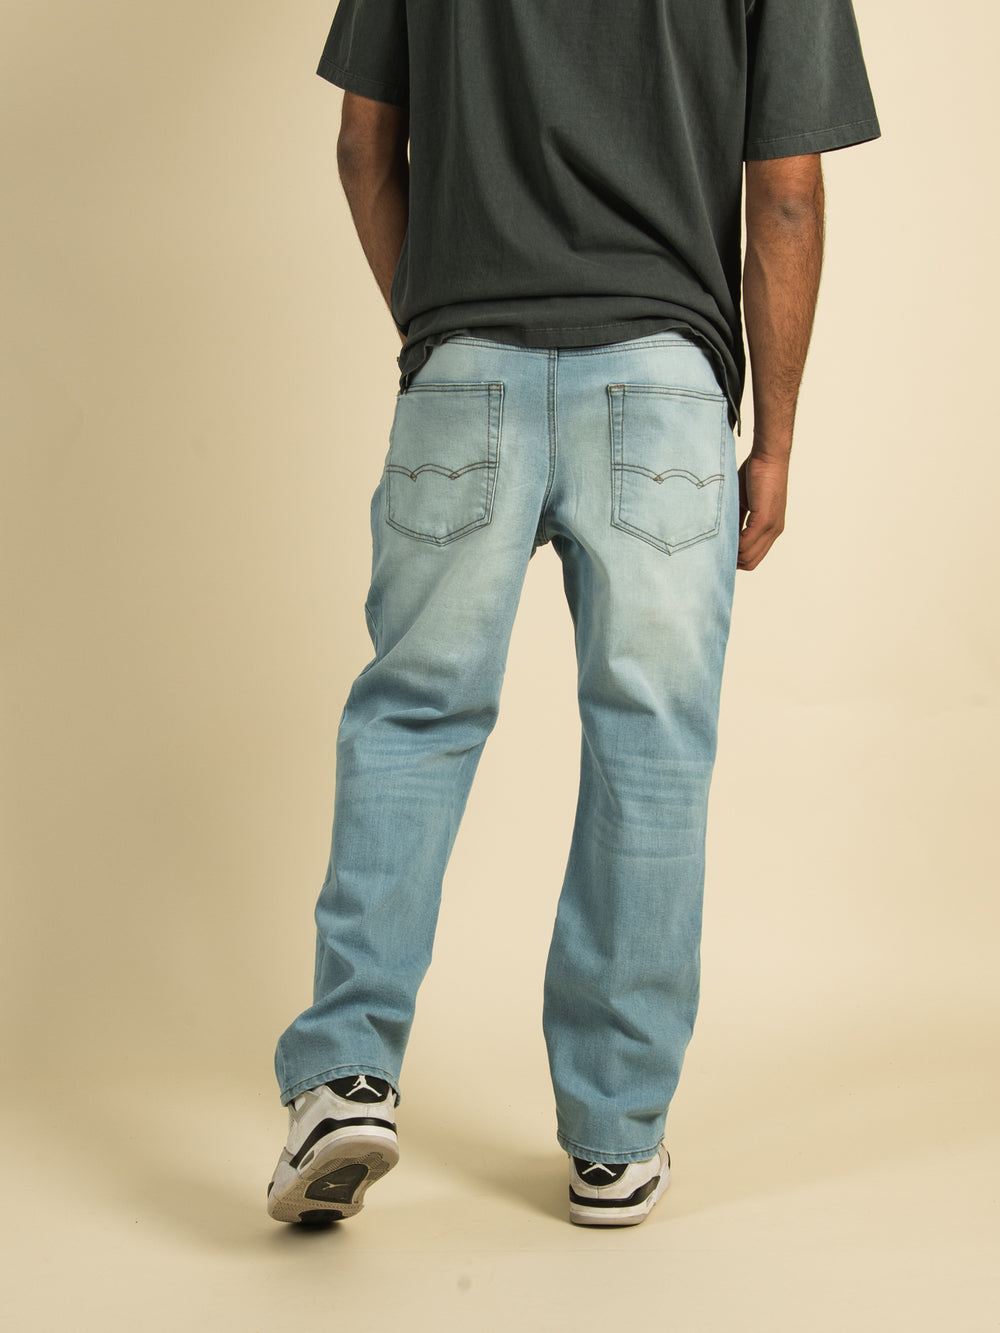 TAINTED RELAXED 5 POCKET DENIM